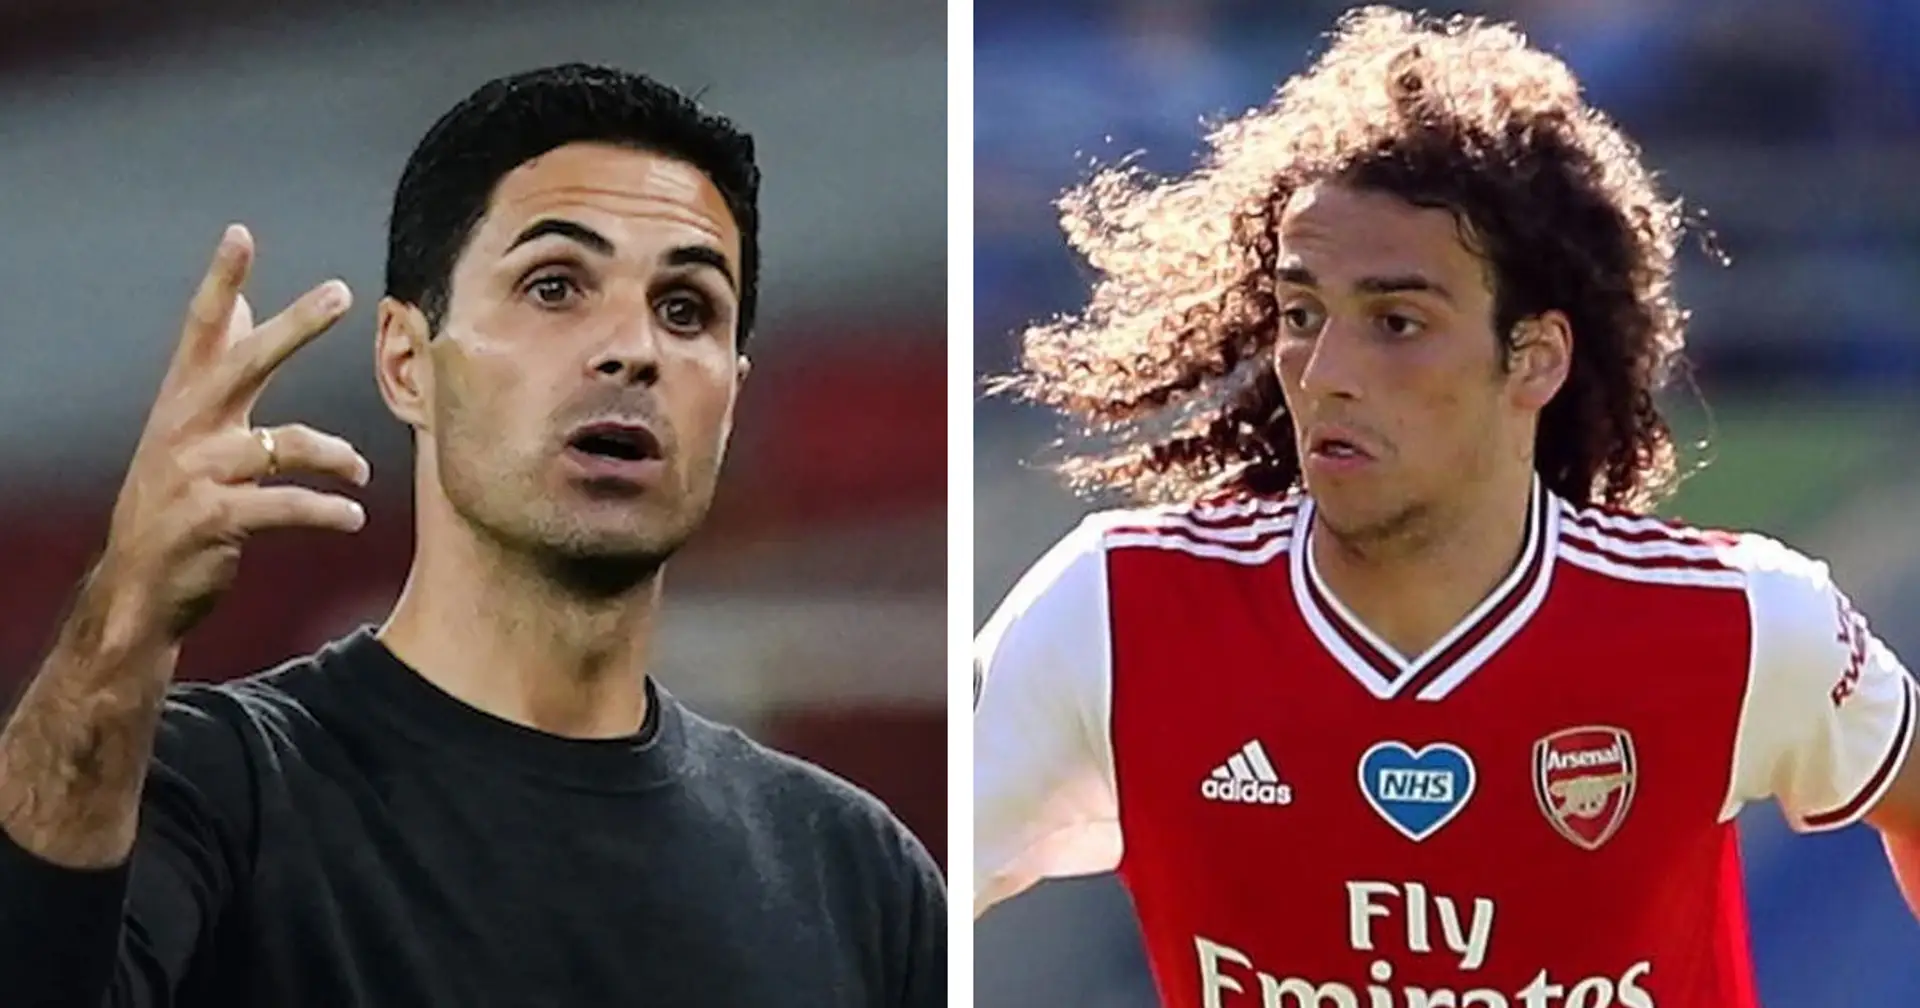 'Arteta is strong enough to exclude players he cannot trust': Kevin Campbell explains why axing Guendouzi was right decision